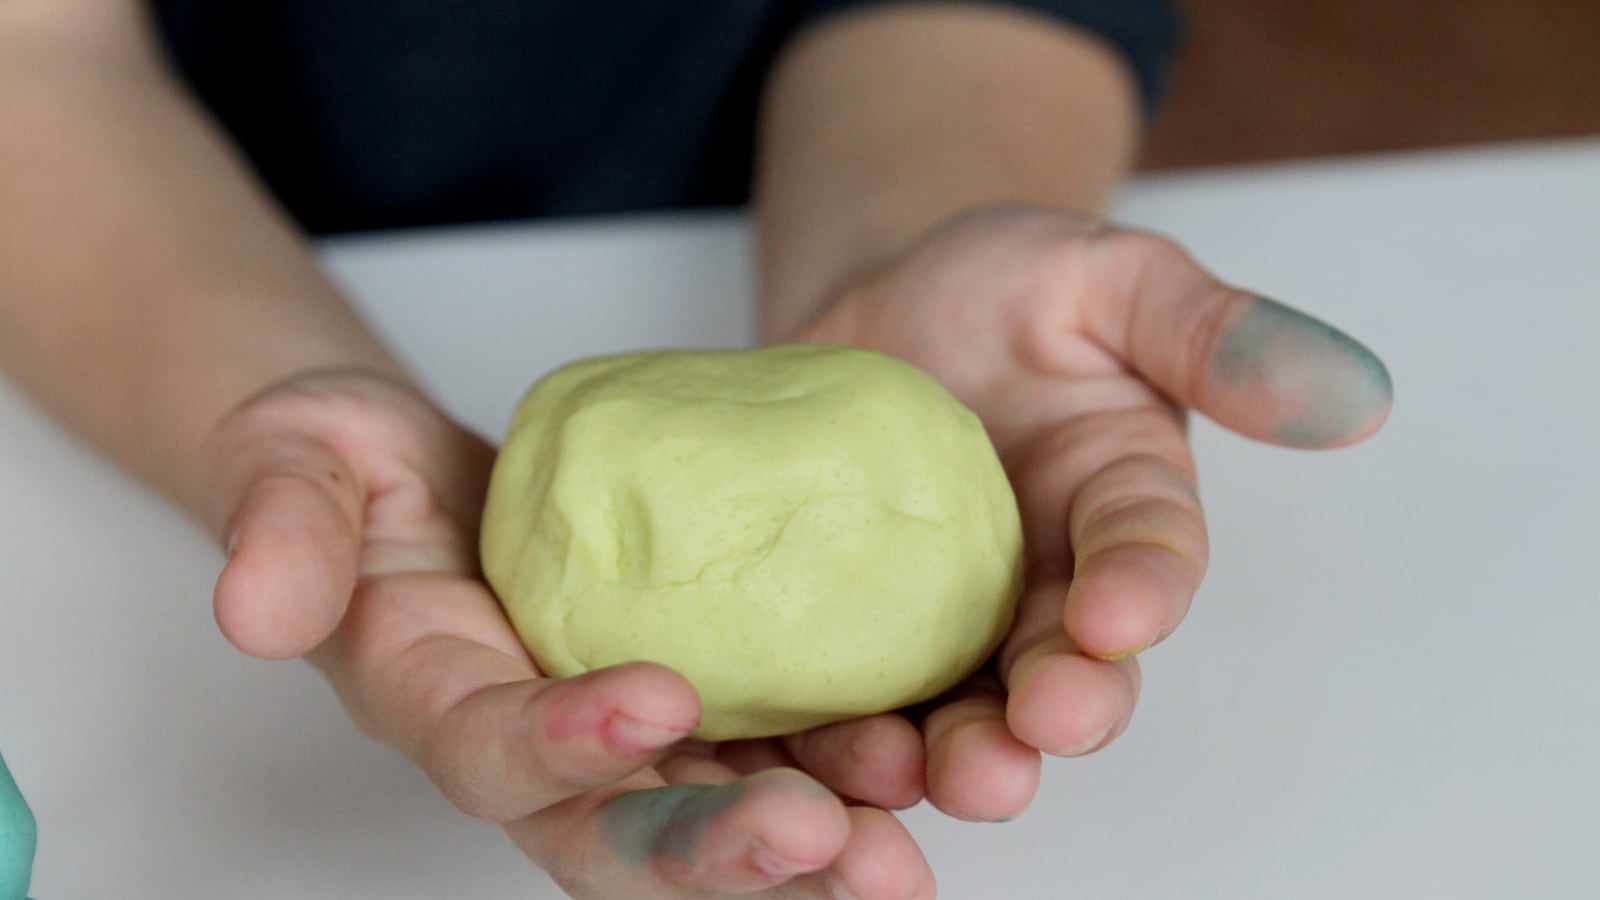 A child’s hands hold a yellow ball of playdough.